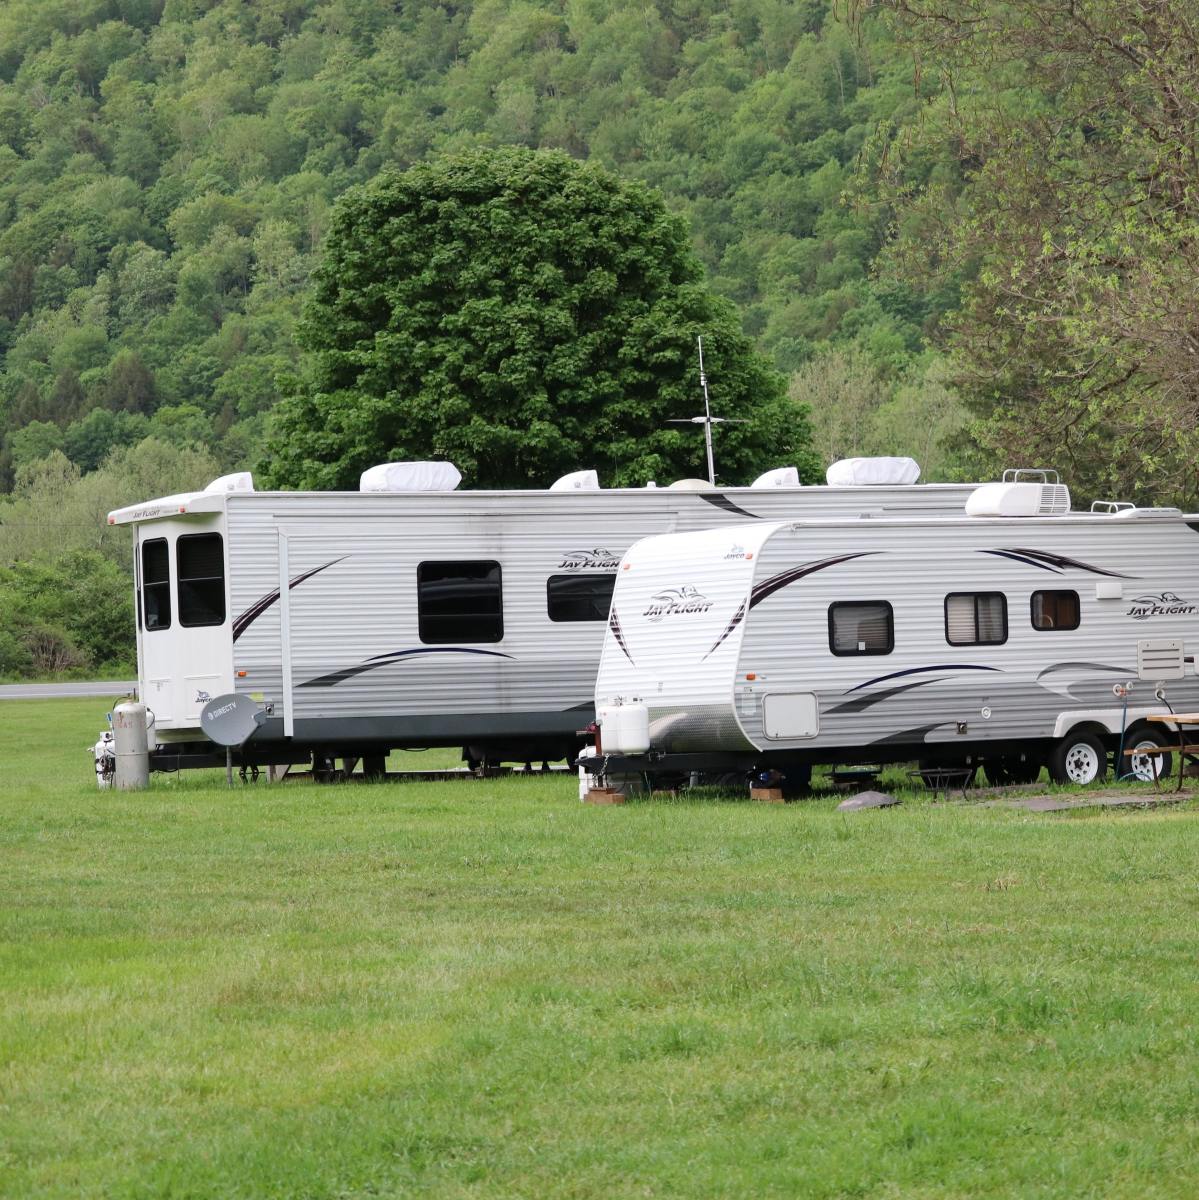 If you want to buy an RV, do yourself a favor and take the time to find out which methods and materials manufacturers use. Doing this could save you a fortune!